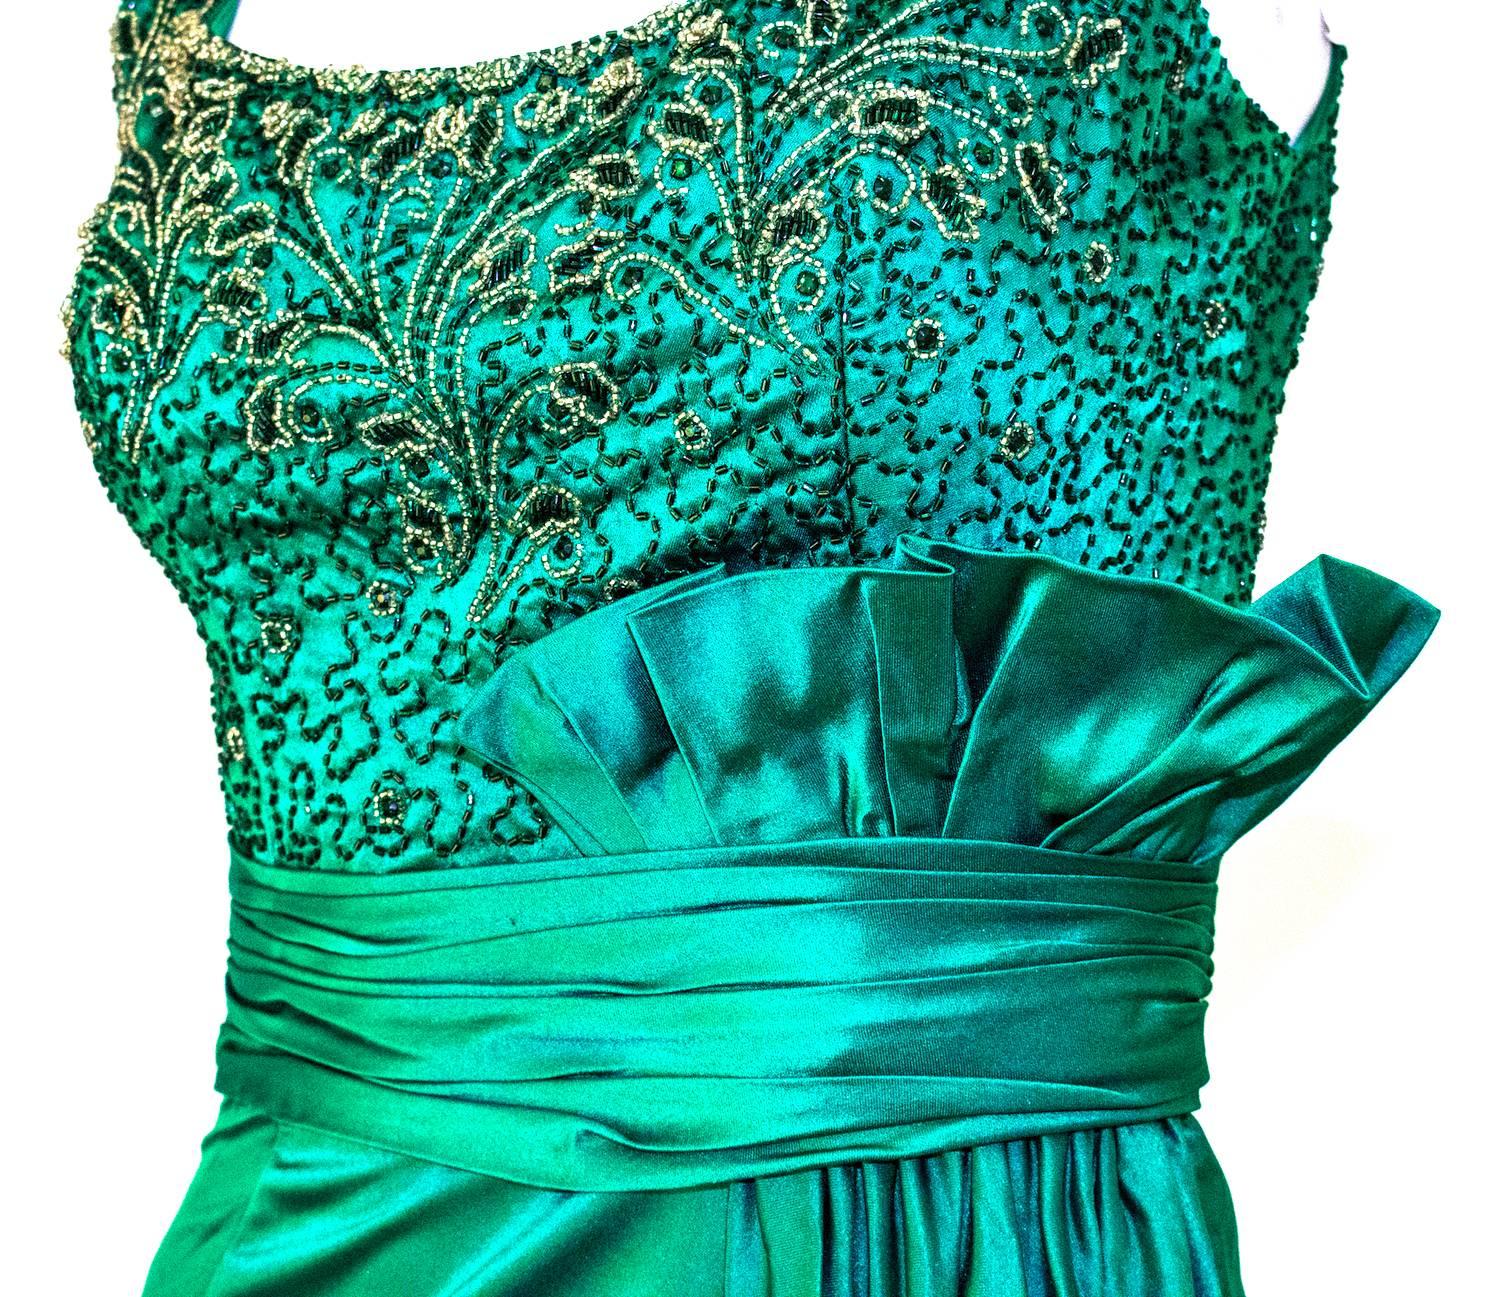 50s Green Satin Column Gown with Beaded Bodice and Gathered Waist Sash. Grecian-esque gathered skirt adornment. Metal zip up the back.